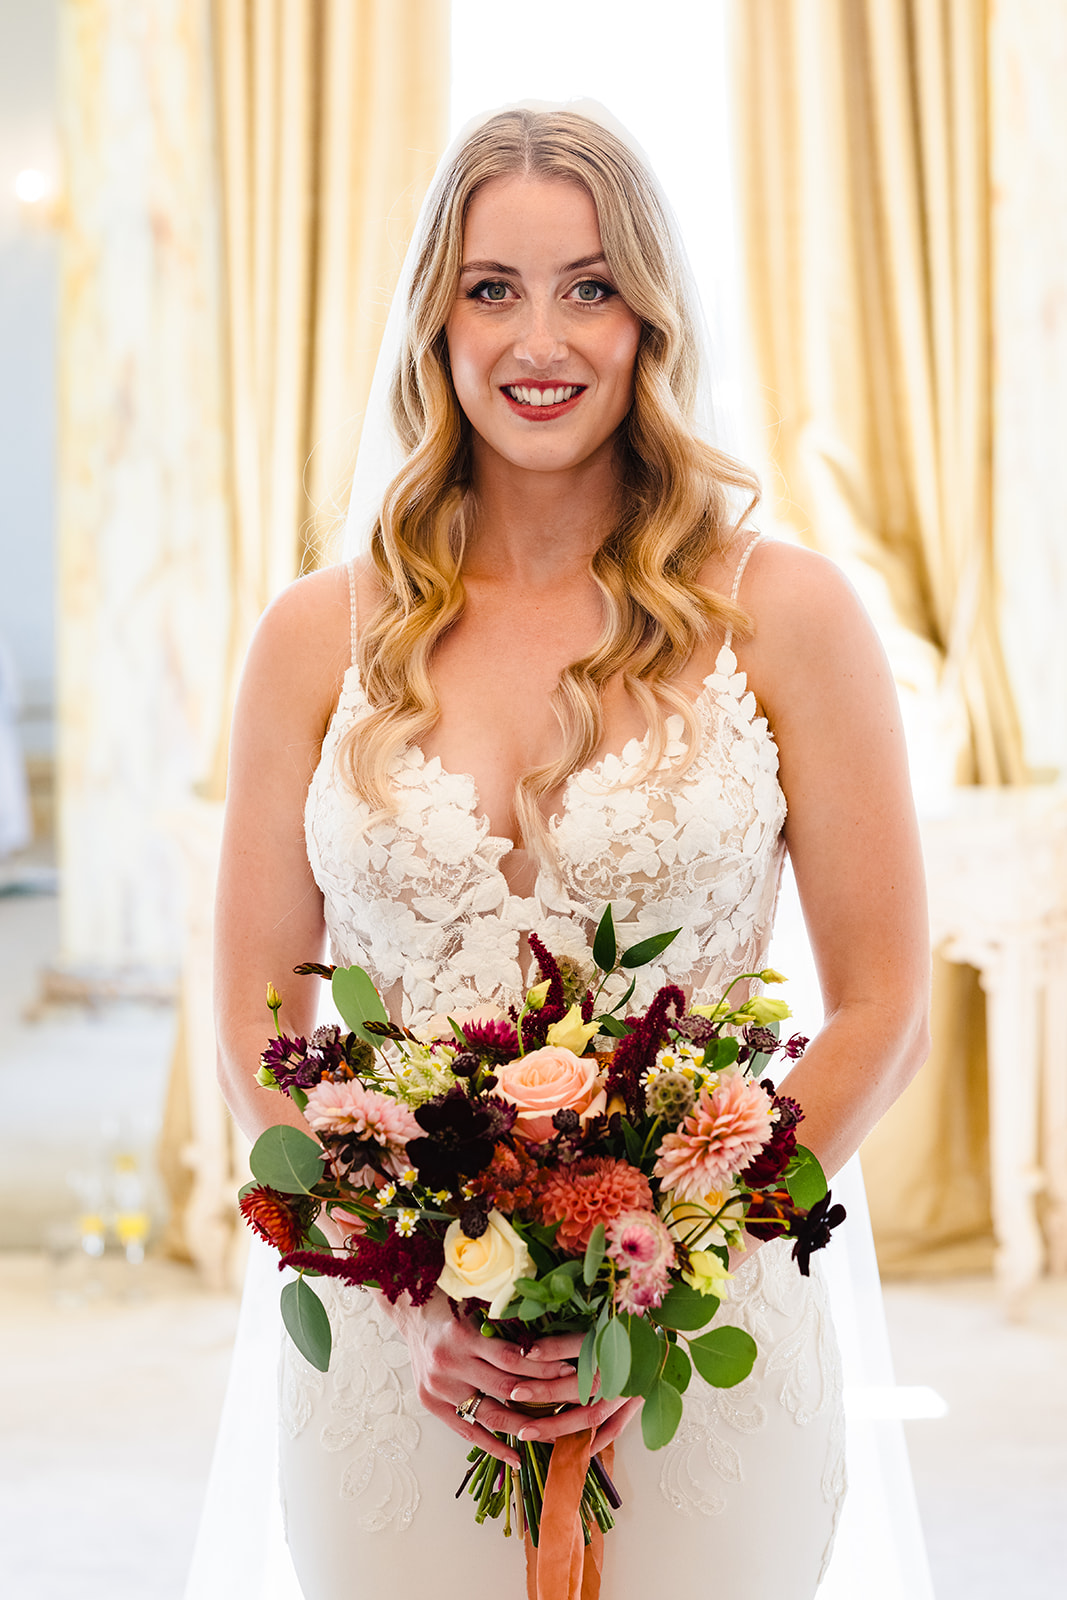 Bride standing with her bright wedding bouquet in rococo suit at gosfield hall